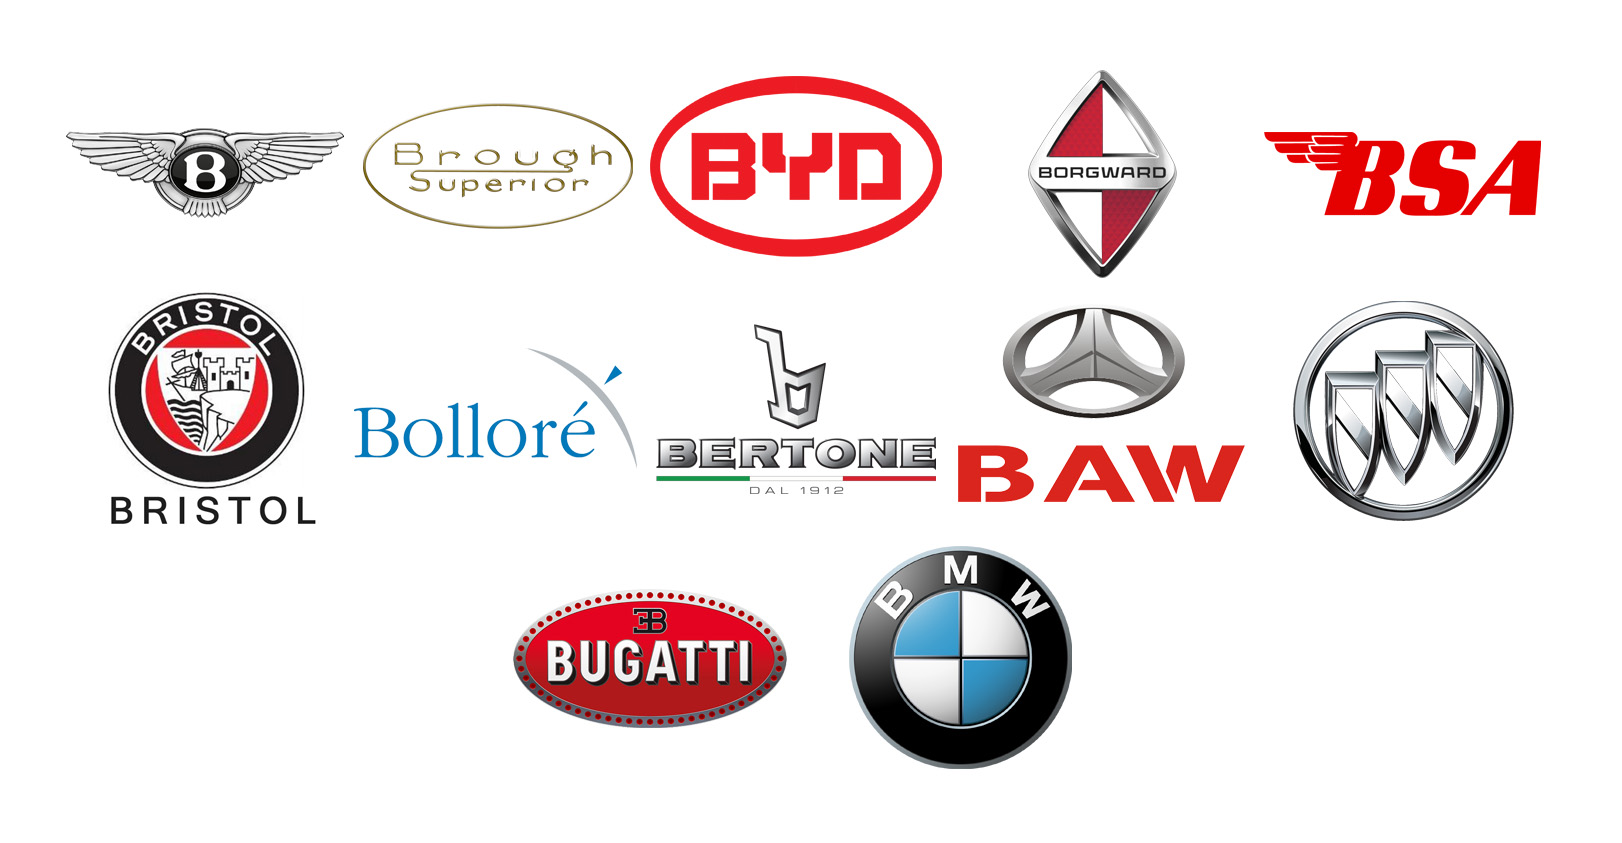 All Car Brands Names List  : Some Are From Manufacturing Companies That Also Use Their Company Name As A Brand Name.